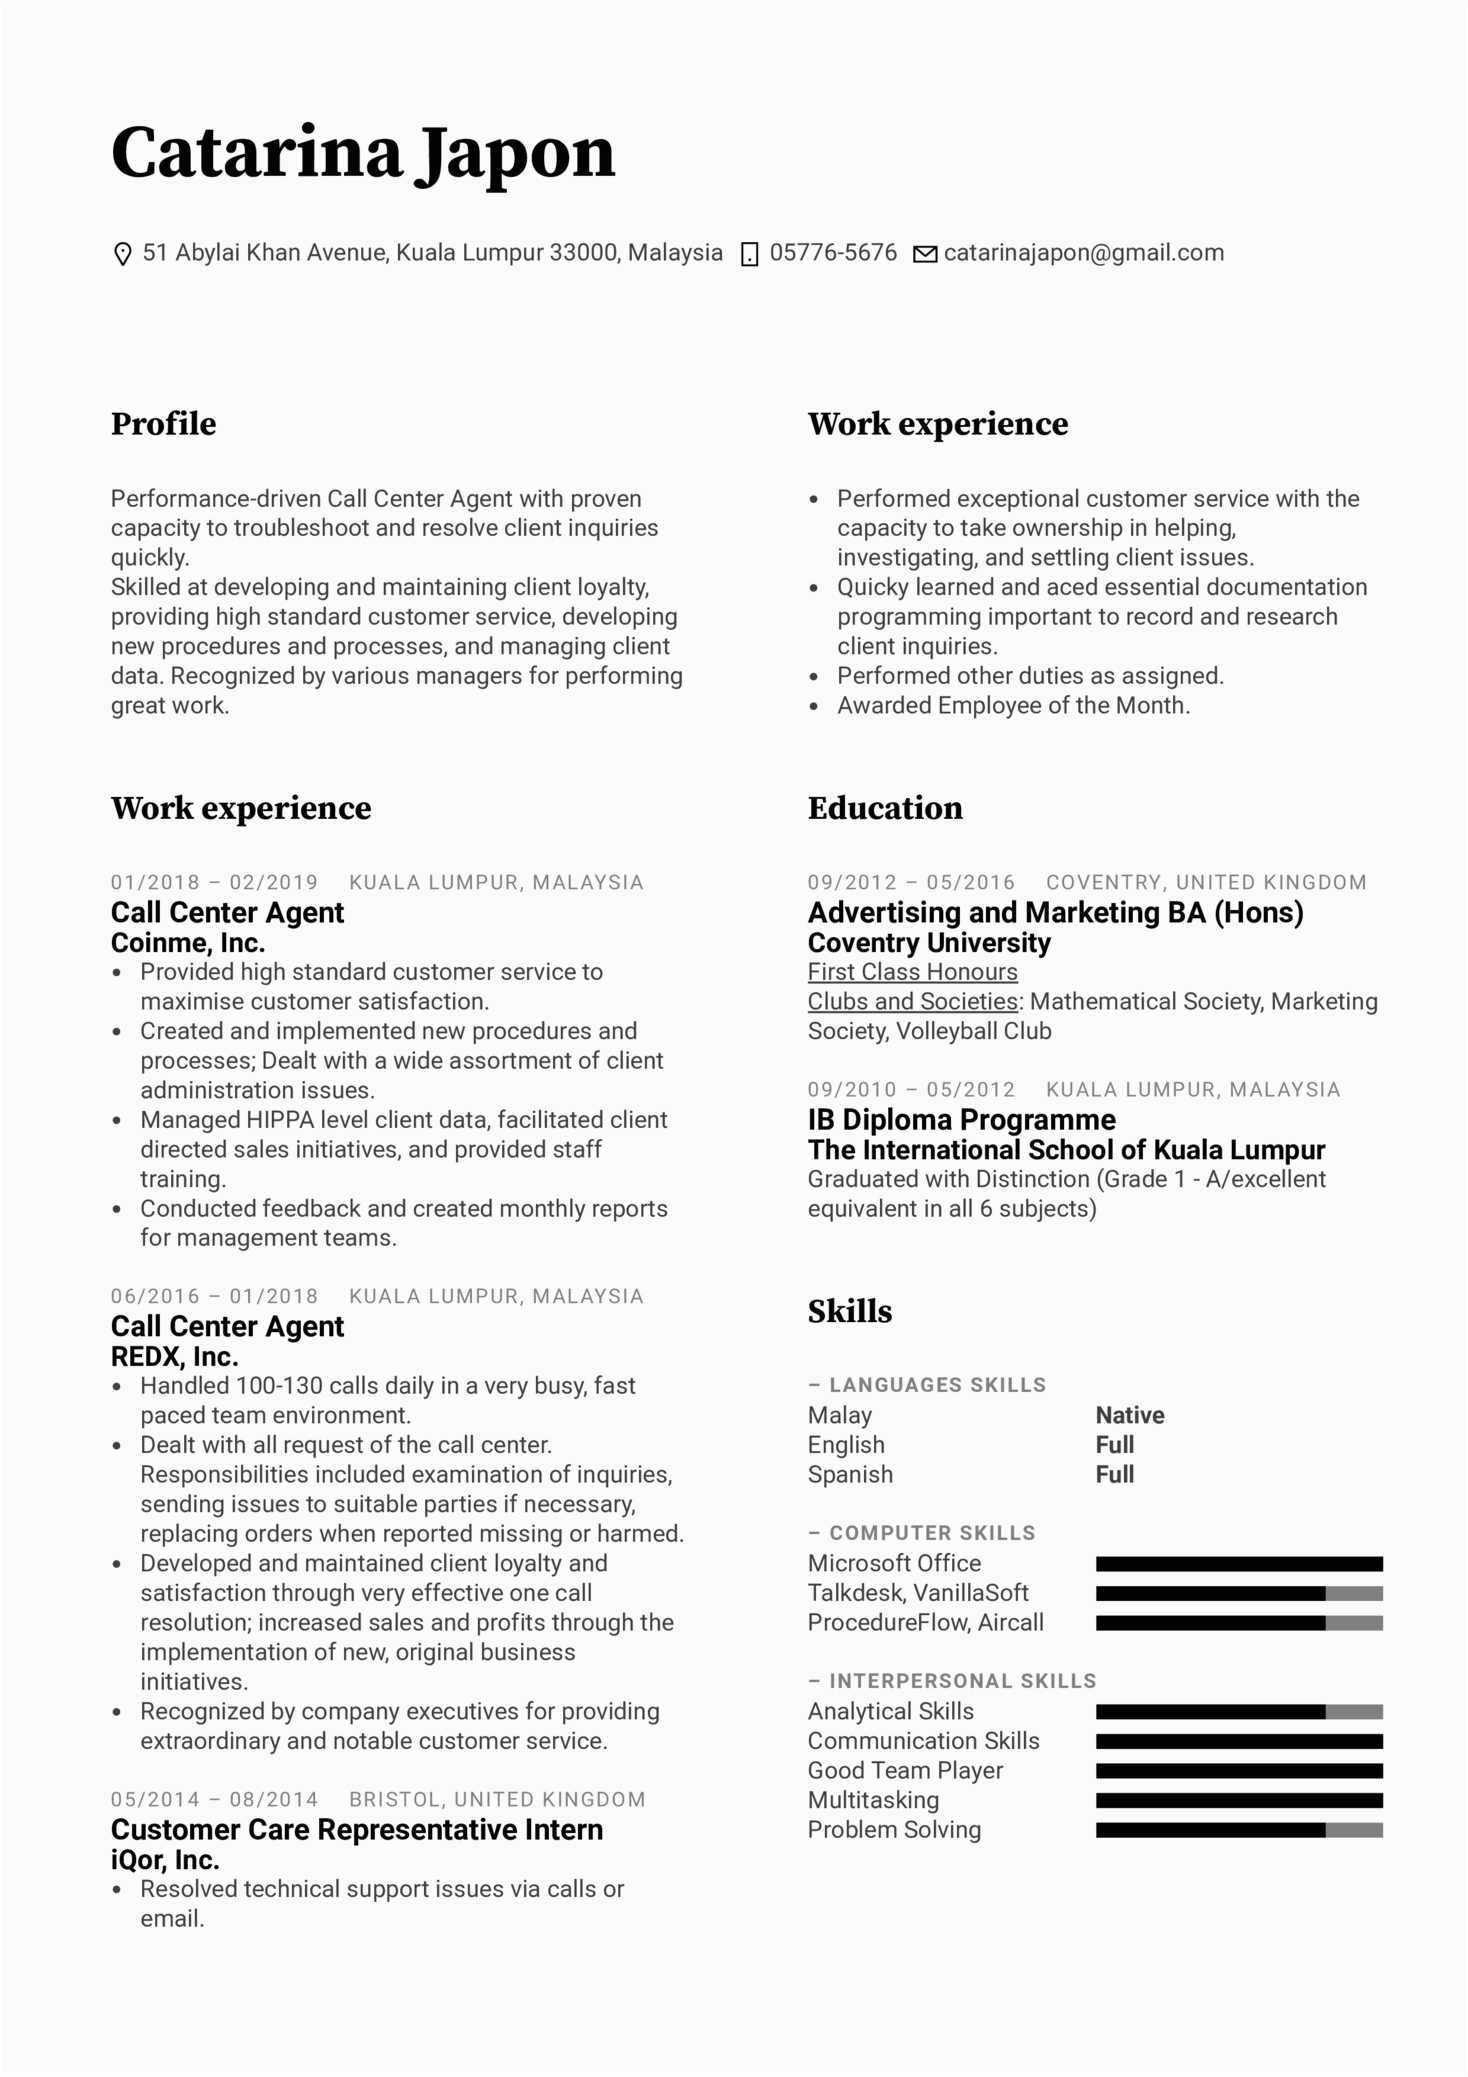 Sample Resume for Call Center Agent with Experience Call Center Agent Resume Template